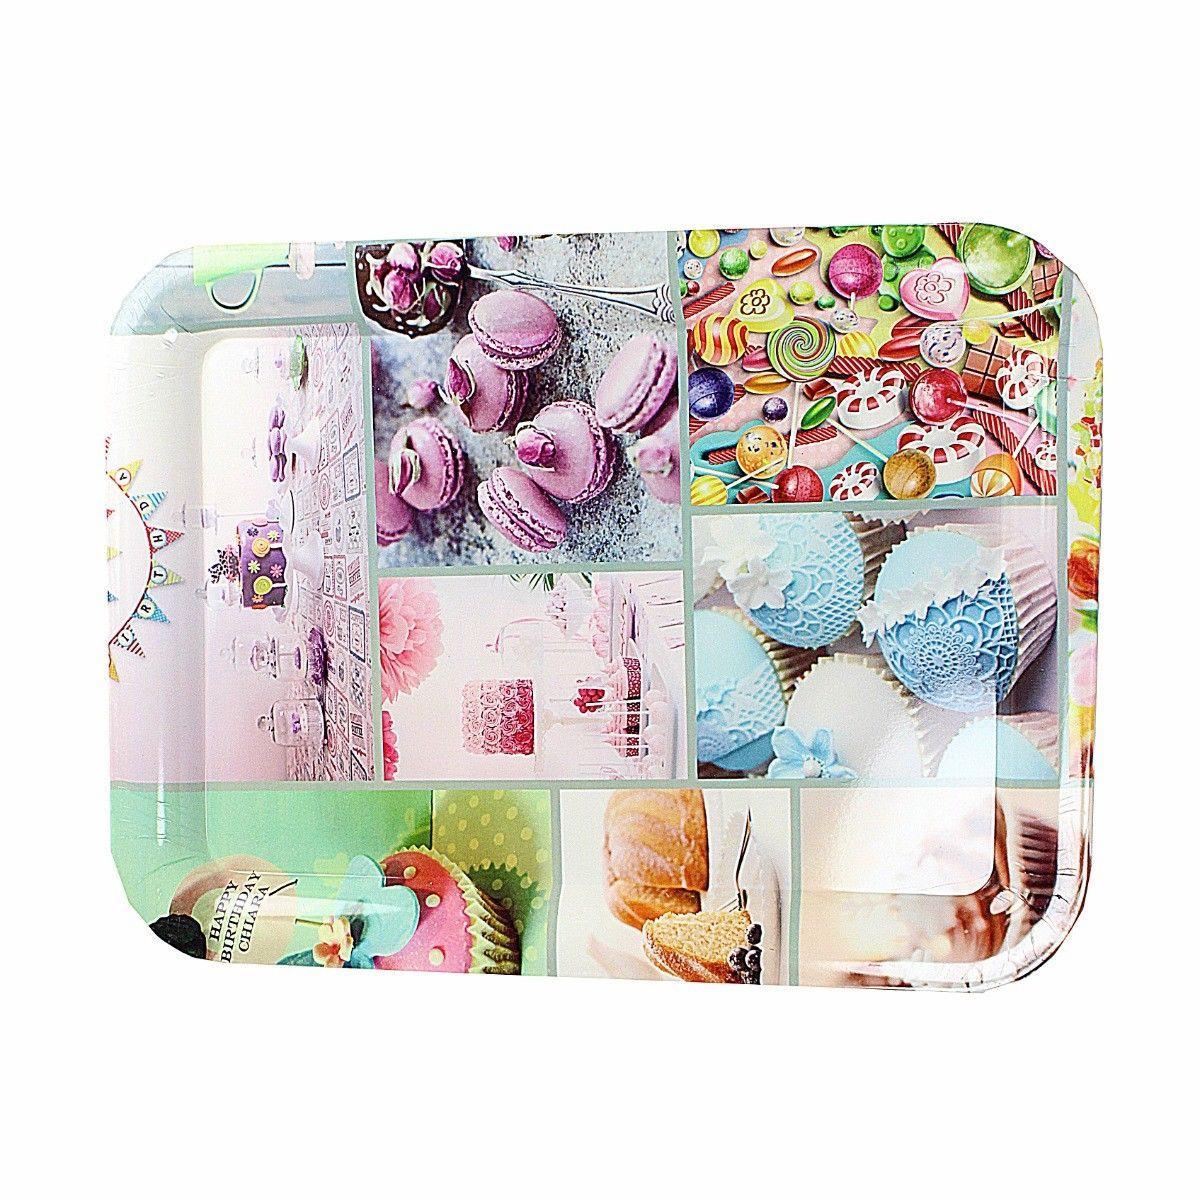 Plastic Serving Tray 30 x 22 cm Assorted Designs 4291 (Parcel Rate)